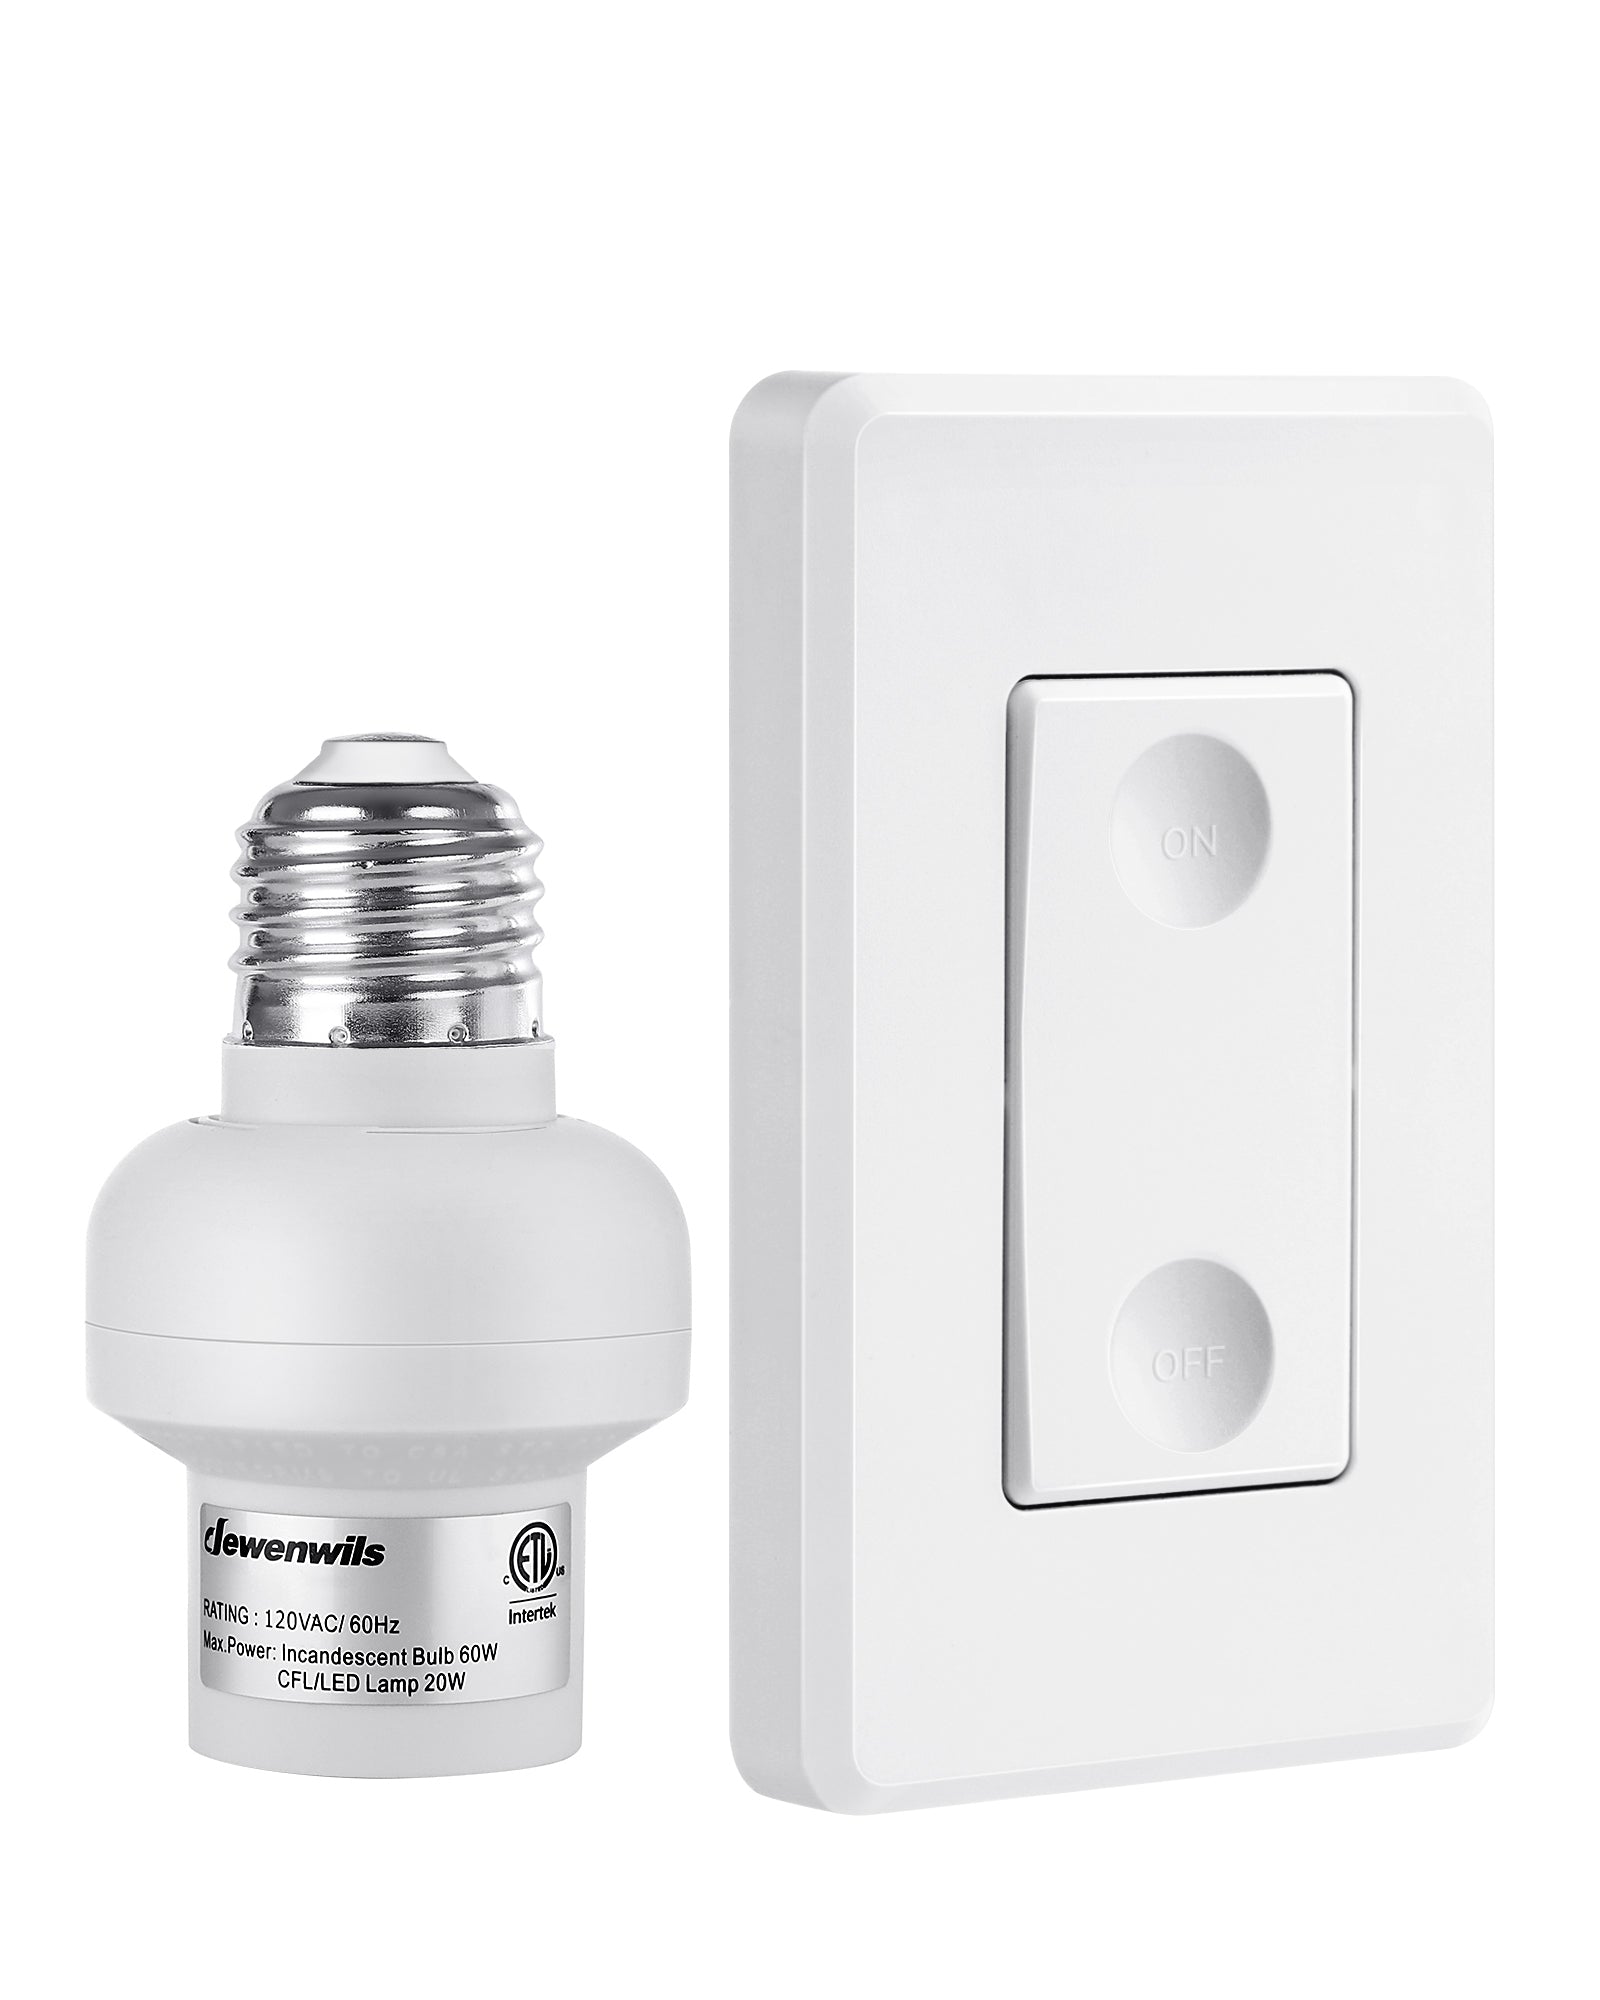 DEWENWILS Programmable Wireless Remote Control Light Bulb Socket (E26/E27)  and Switch (1 Remote + 3 Sockets)--SHRLS13A1